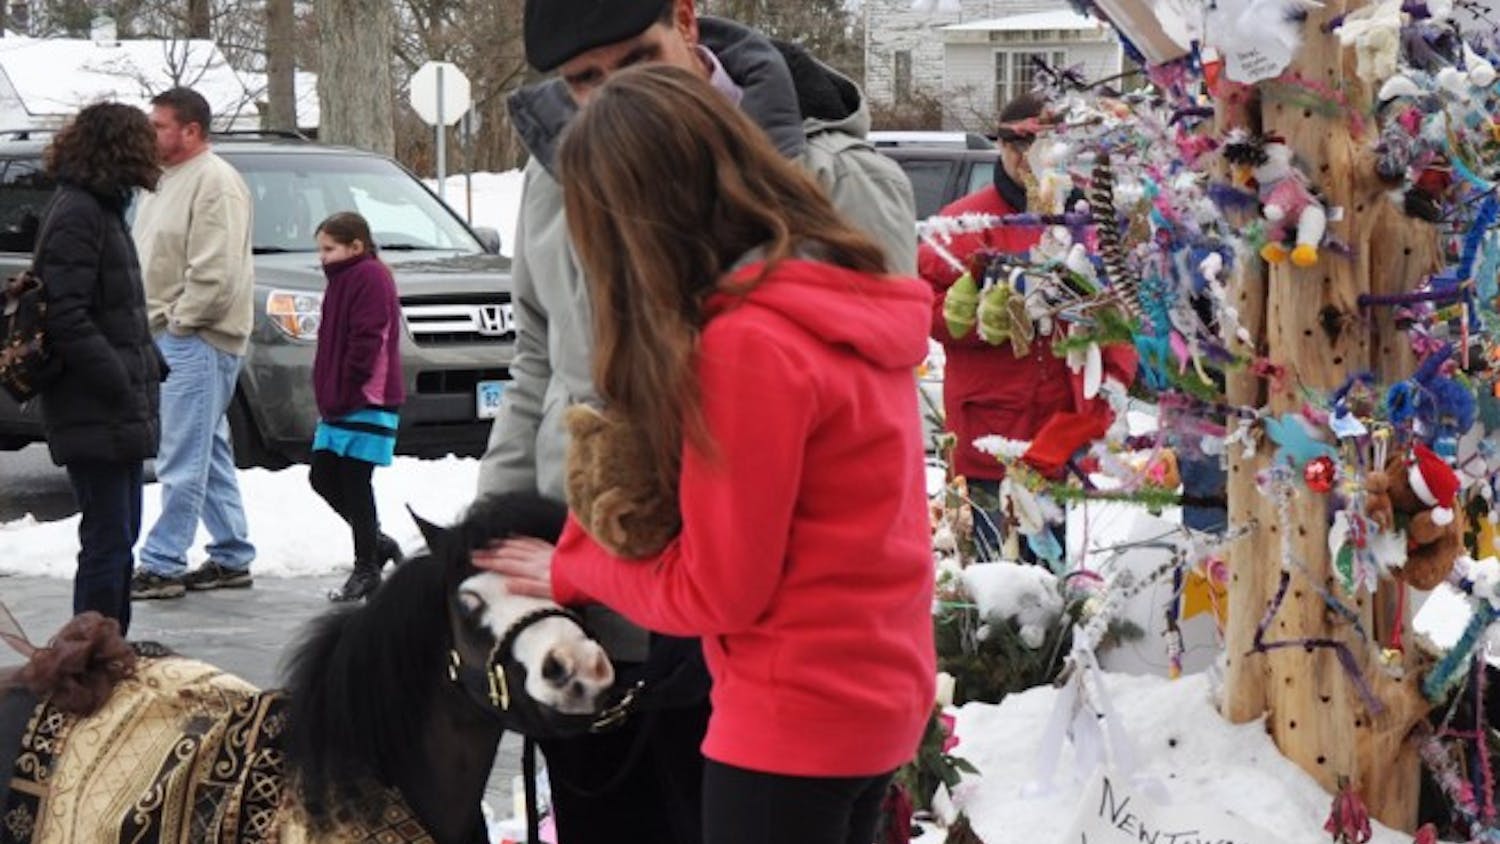 Magic, a Gentle Carousel mini horse of High Springs, comforts a Newtown, Conn., girl at a memorial site in the town. Gentle Carousel Miniature Therapy Horses is visiting the Newtown community to aid in the healing process.